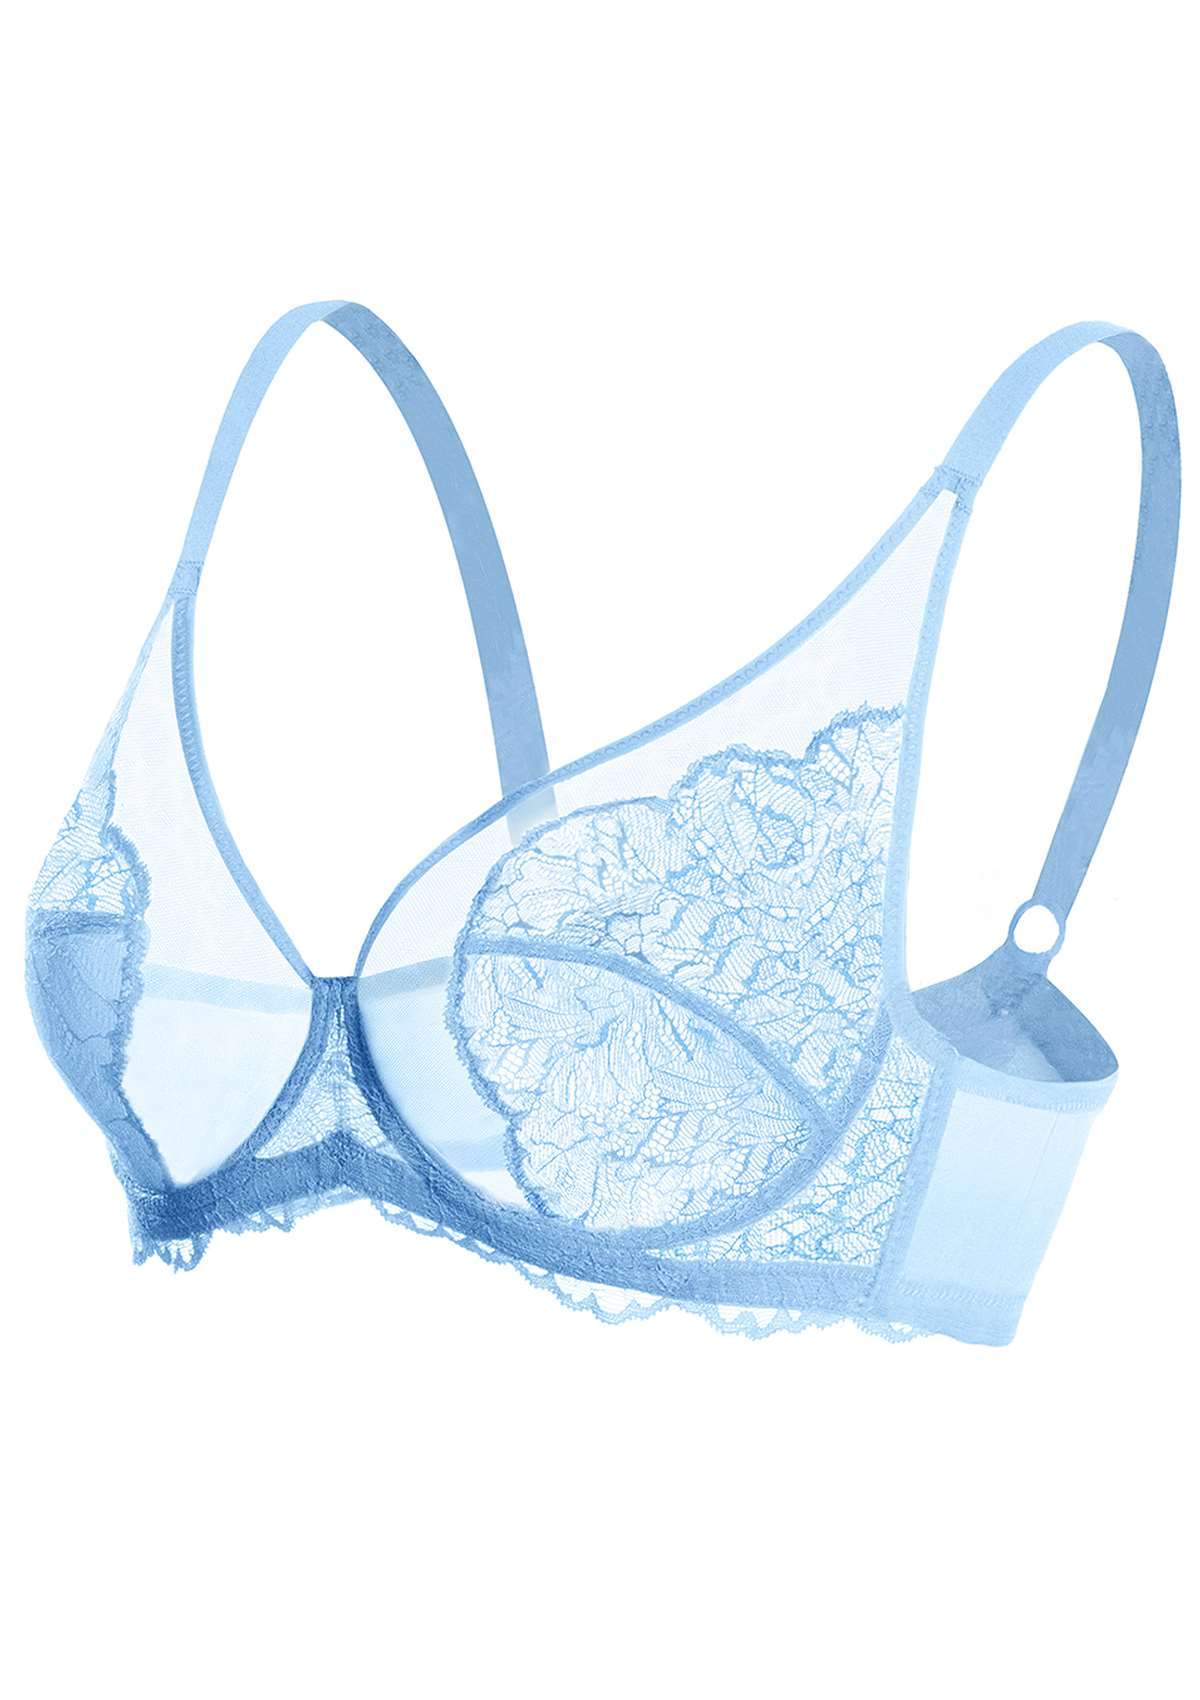 HSIA Blossom Full Coverage Supportive Unlined Underwire Bra Set - Storm Blue / 36 / DDD/F